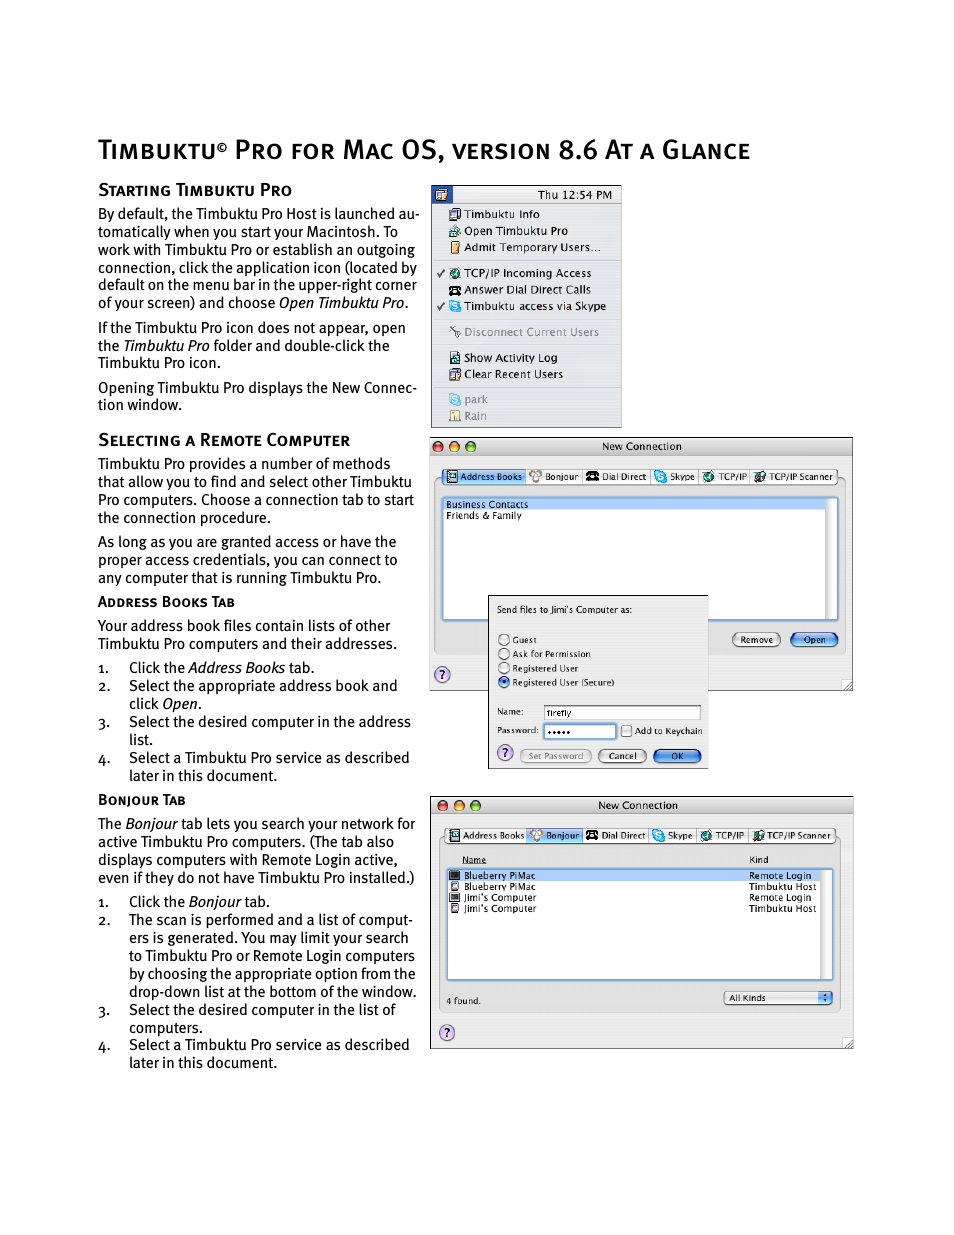 Timbuktu for Macintosh v8.8.3- At a Glance Guide